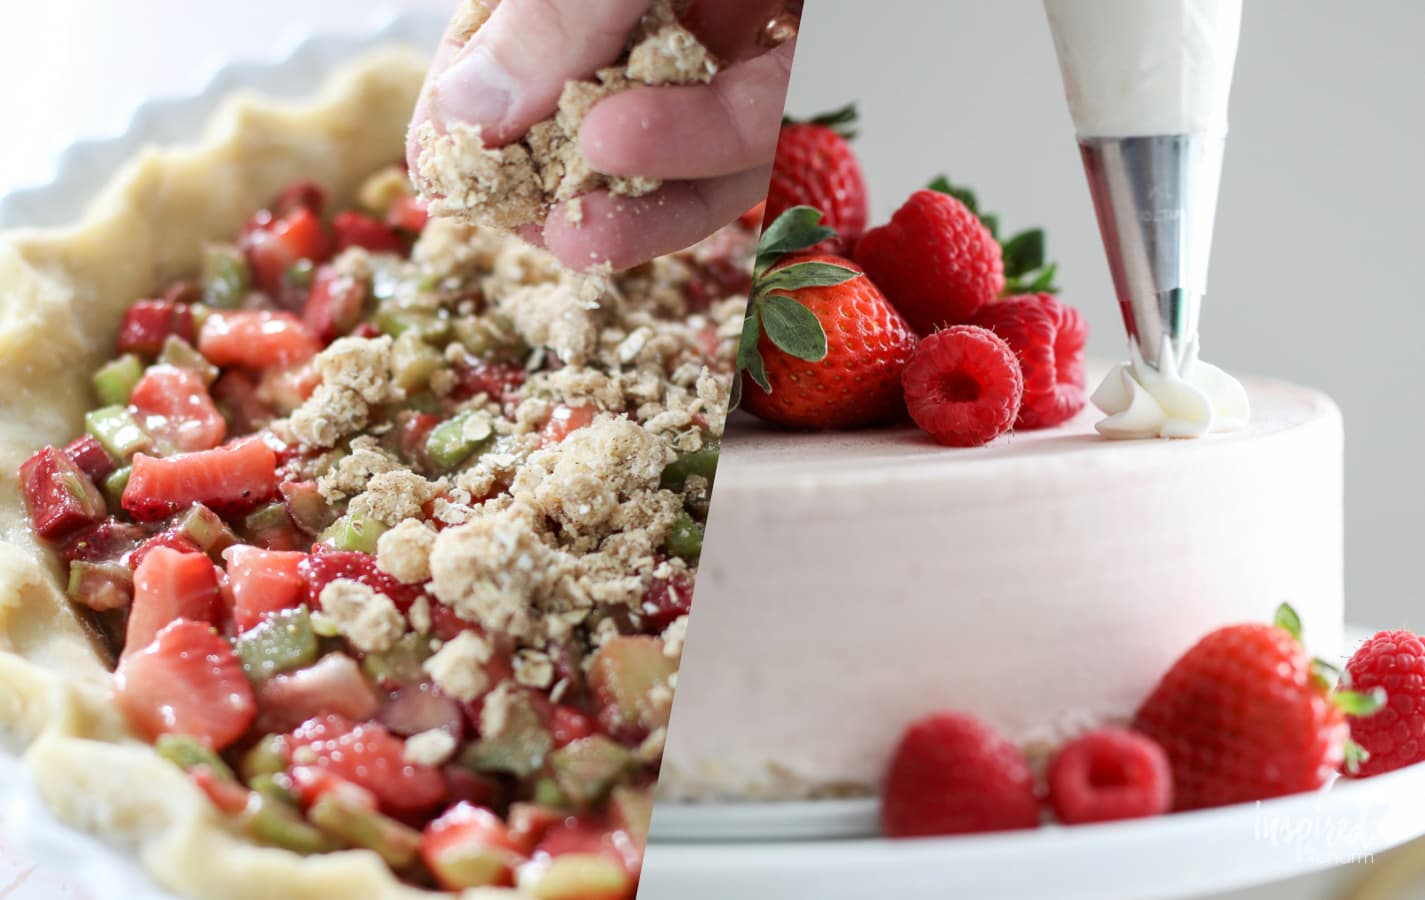 The Best Strawberry Desserts for Summer